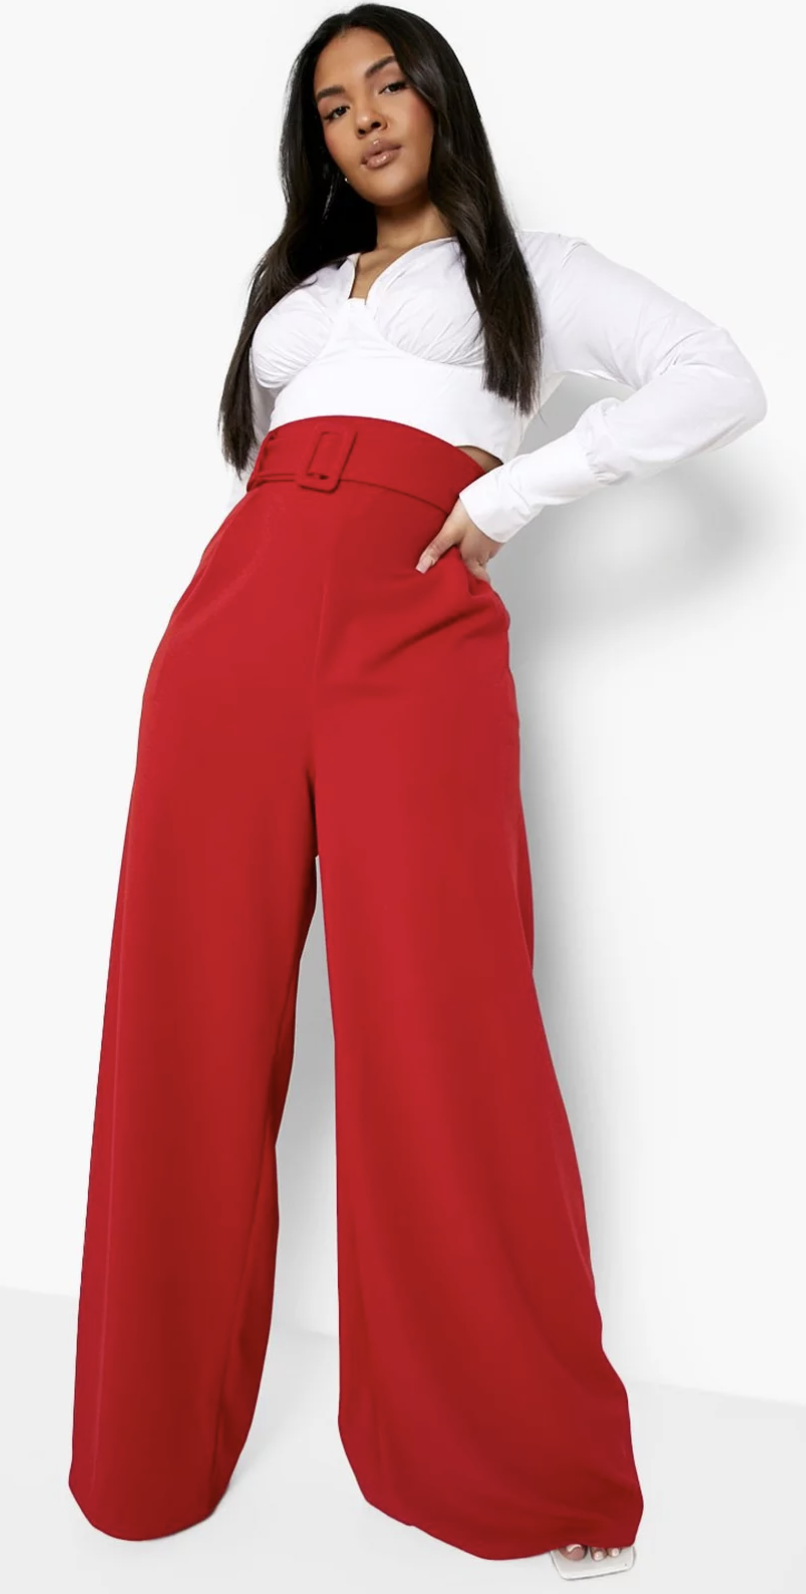 Wide leg plus size pants from Boohoo